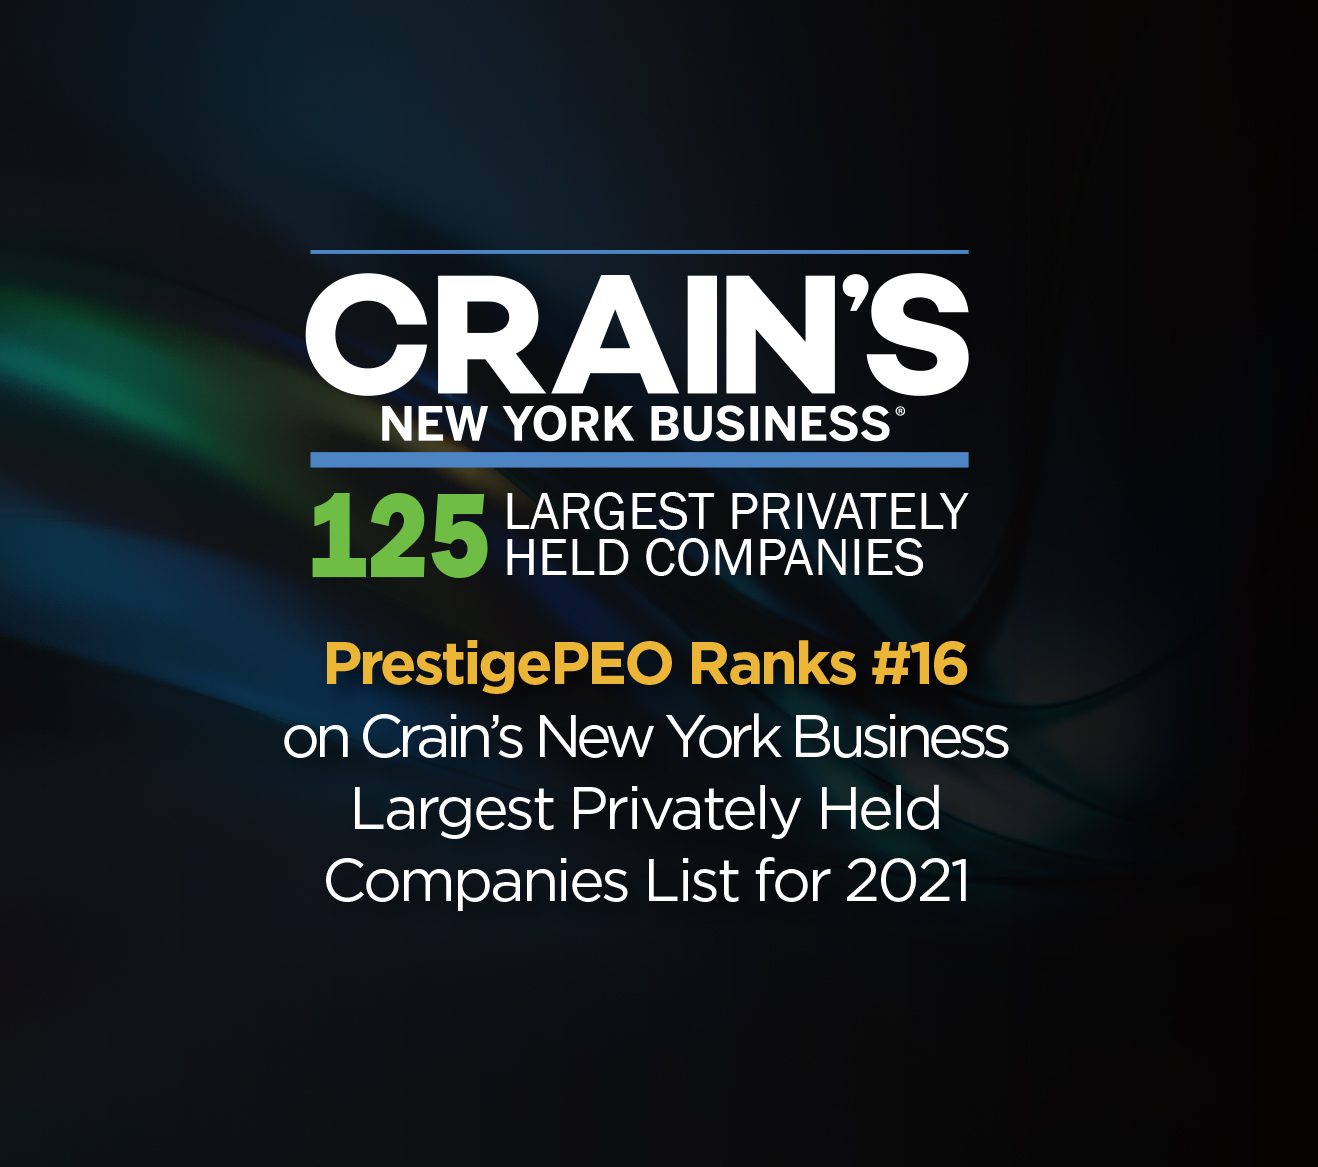 PrestigePEO Ranks #16 on Crain’s New York Business’ Largest  Privately Held Companies List for 2021